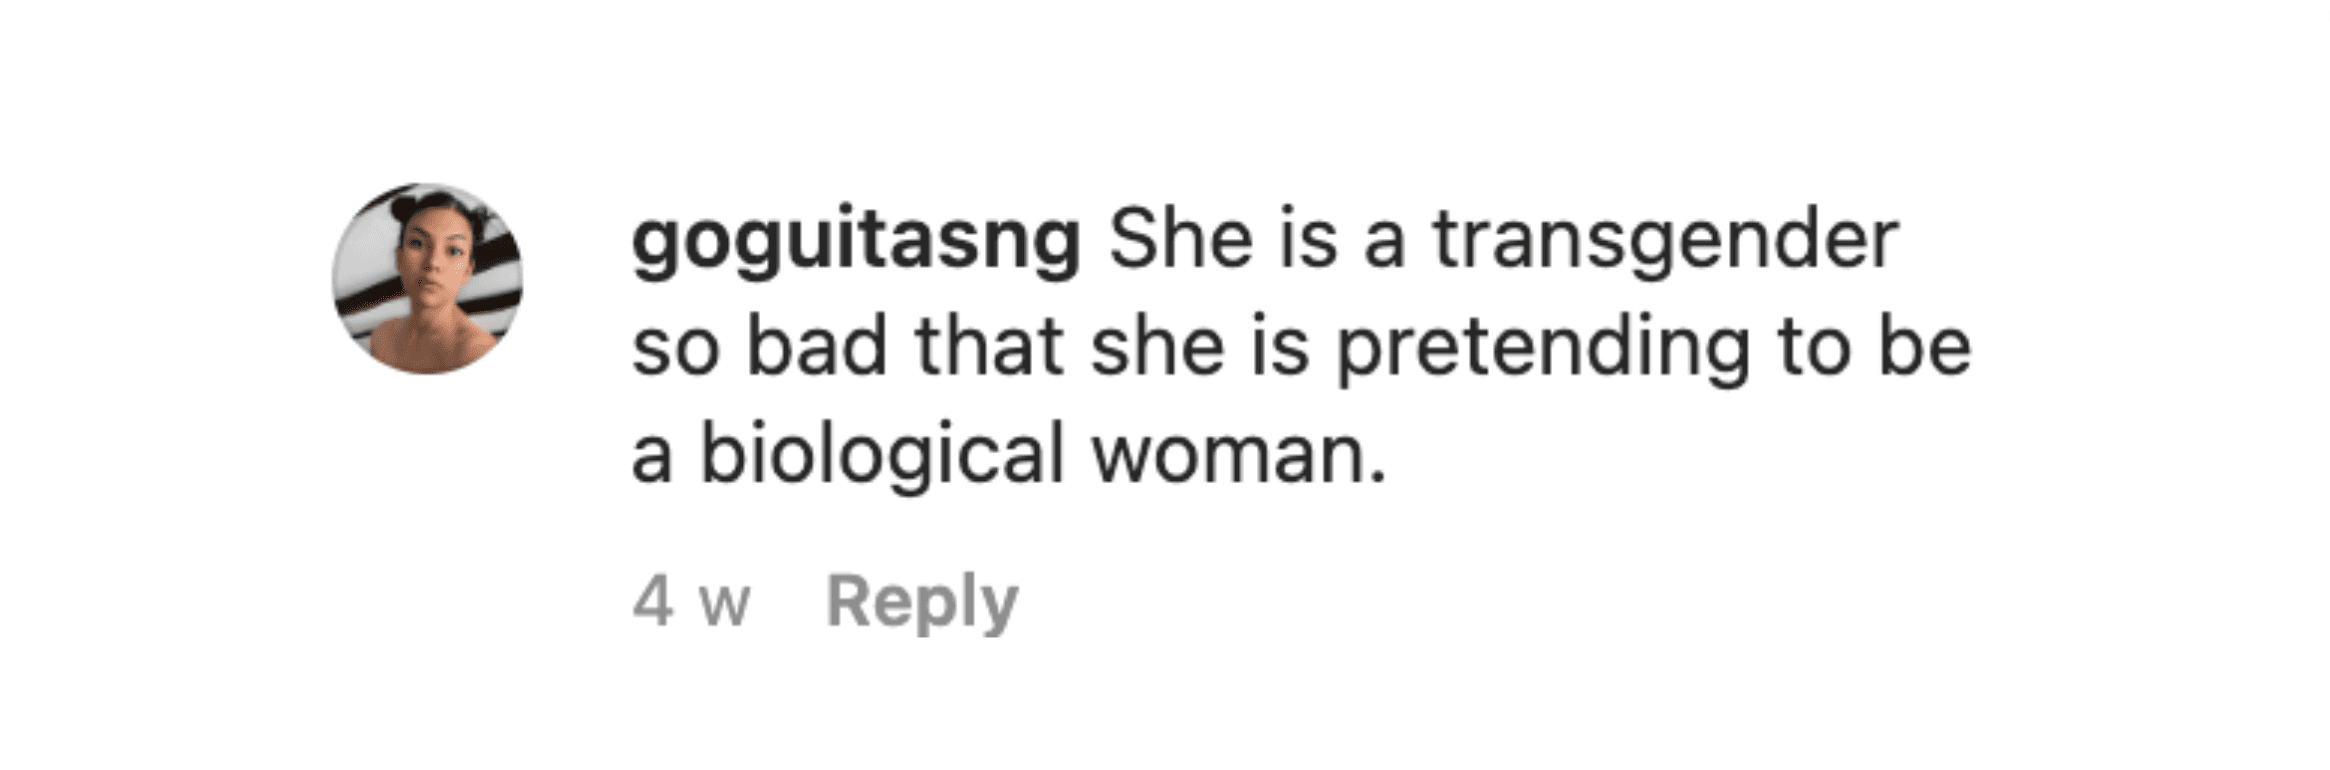 A comment left on a video of Amal Clooney on Charlptte Tilbury's Instagram page | Source: Instagram.com/charlottetilbury